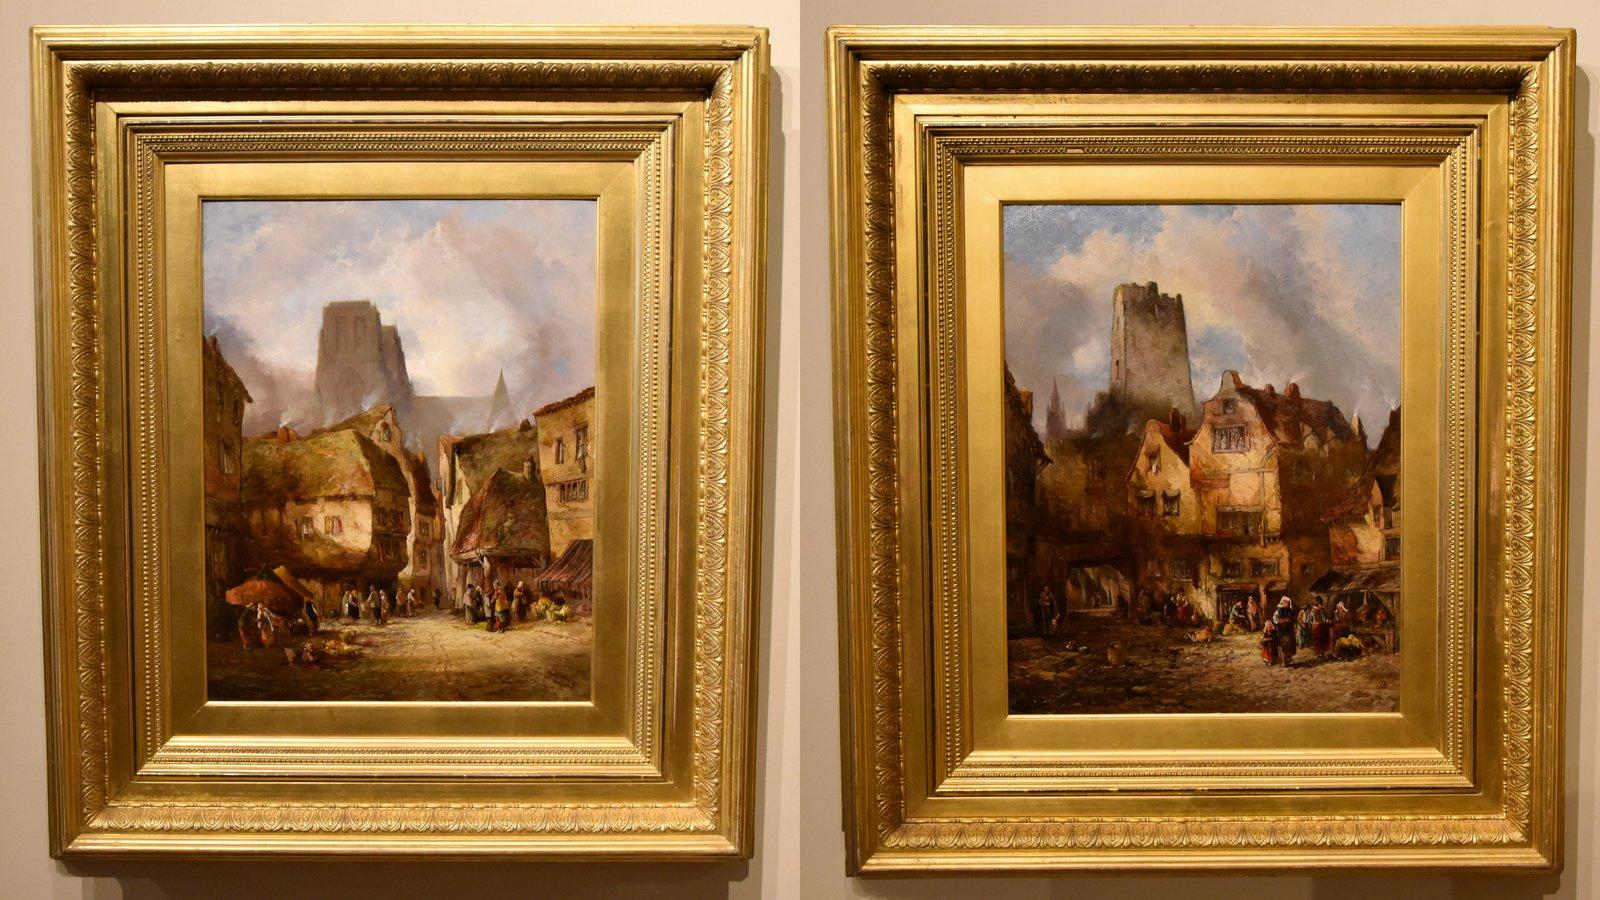 Oil Painting Pair by Alfred Montague "Near St.Lo" "Abberville" exhibited 1832- 1883 Townscene and landscape painter, prolific exhibitor and member of the Royal Society. Both oil on board. Signed and dated 1881. In original frames.

Dimensions